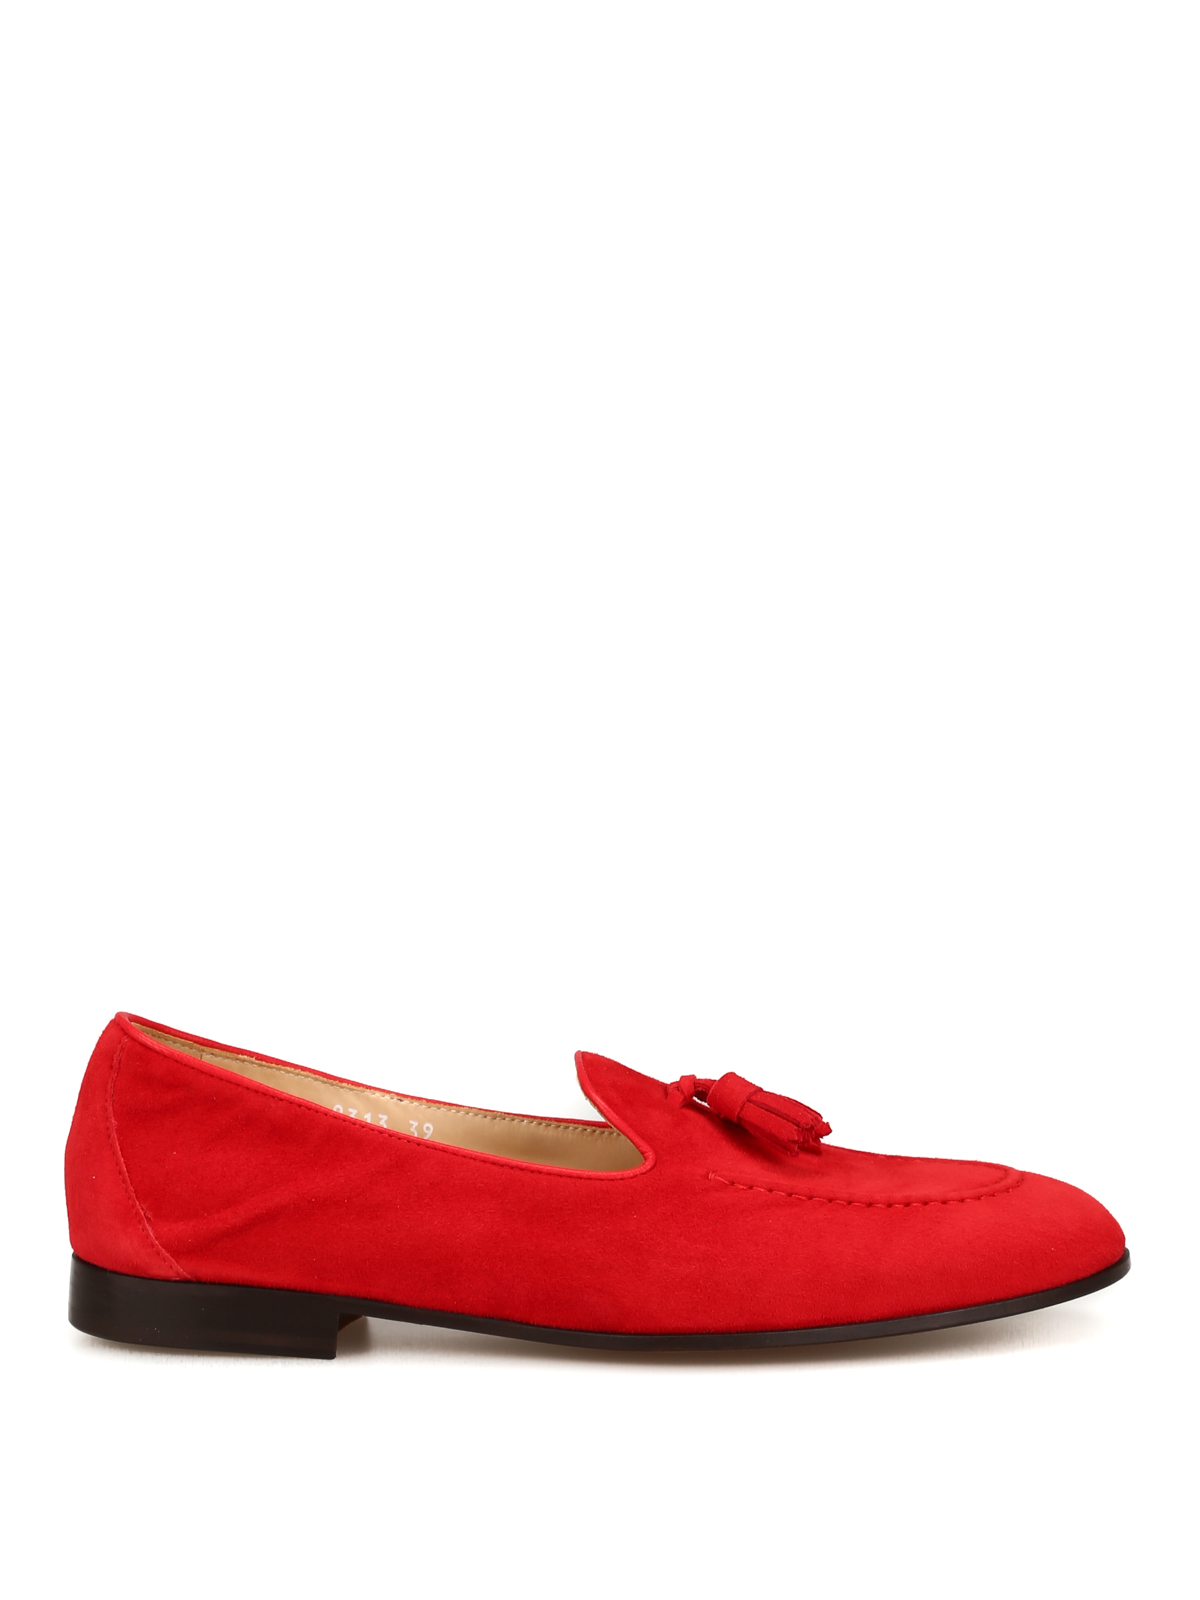 Loafers & Slippers Doucal's - Roger bright red suede loafers -  8313MEGANF064TR00